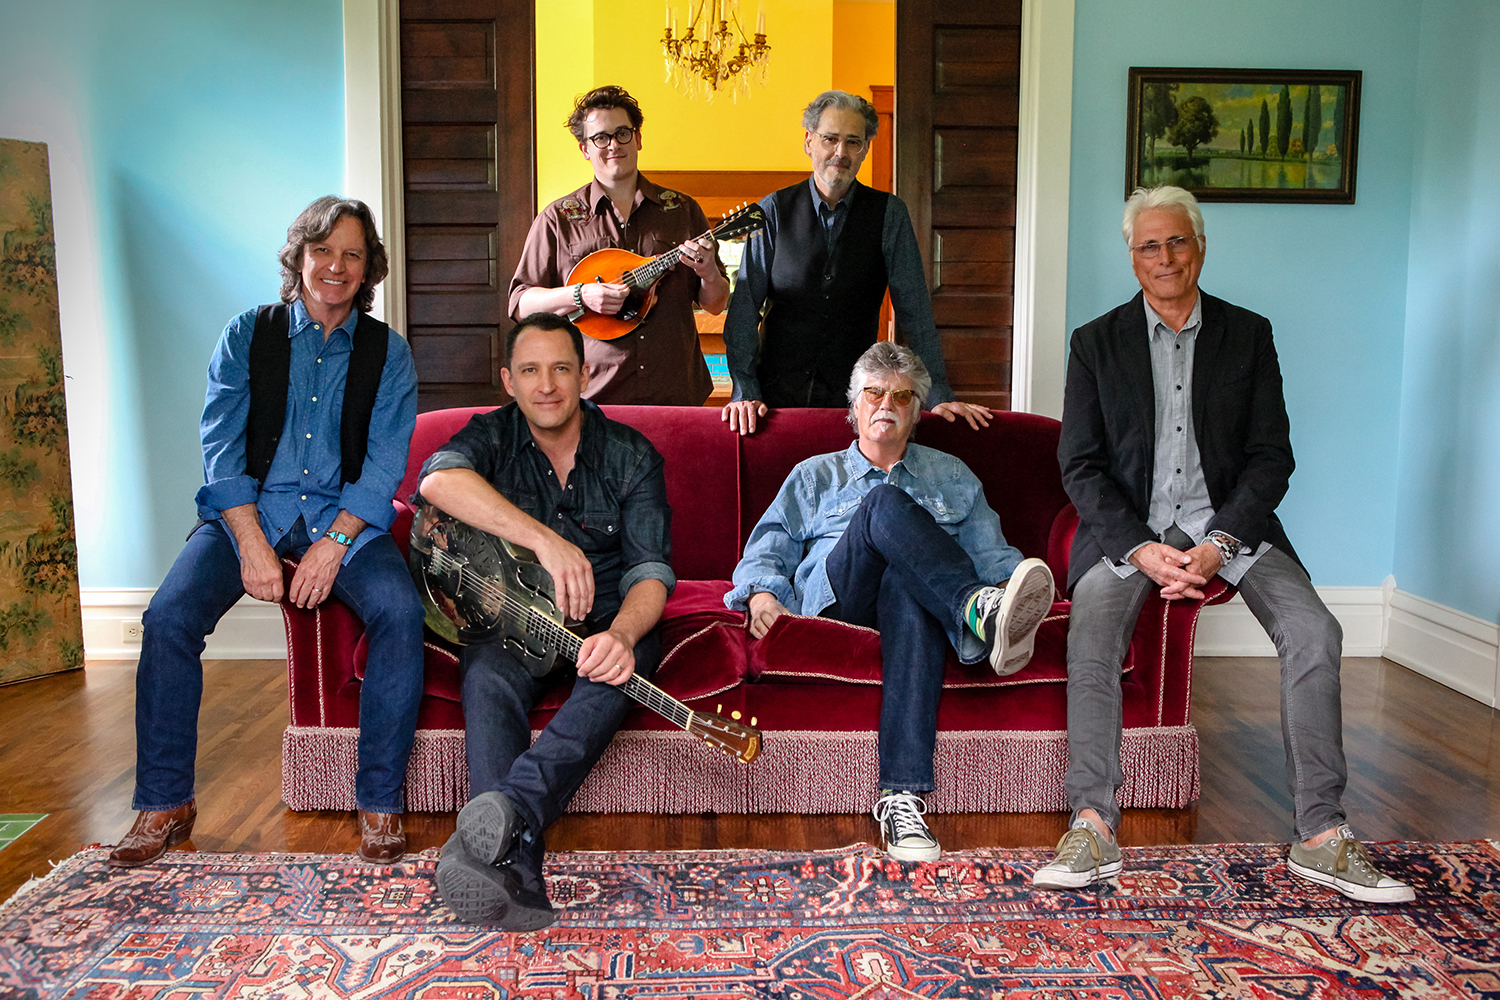 A promotional photo of the Nitty Gritty Dirt Band. Four of the six band members are sitting on a red couch, and the two remaining members stand behind them.